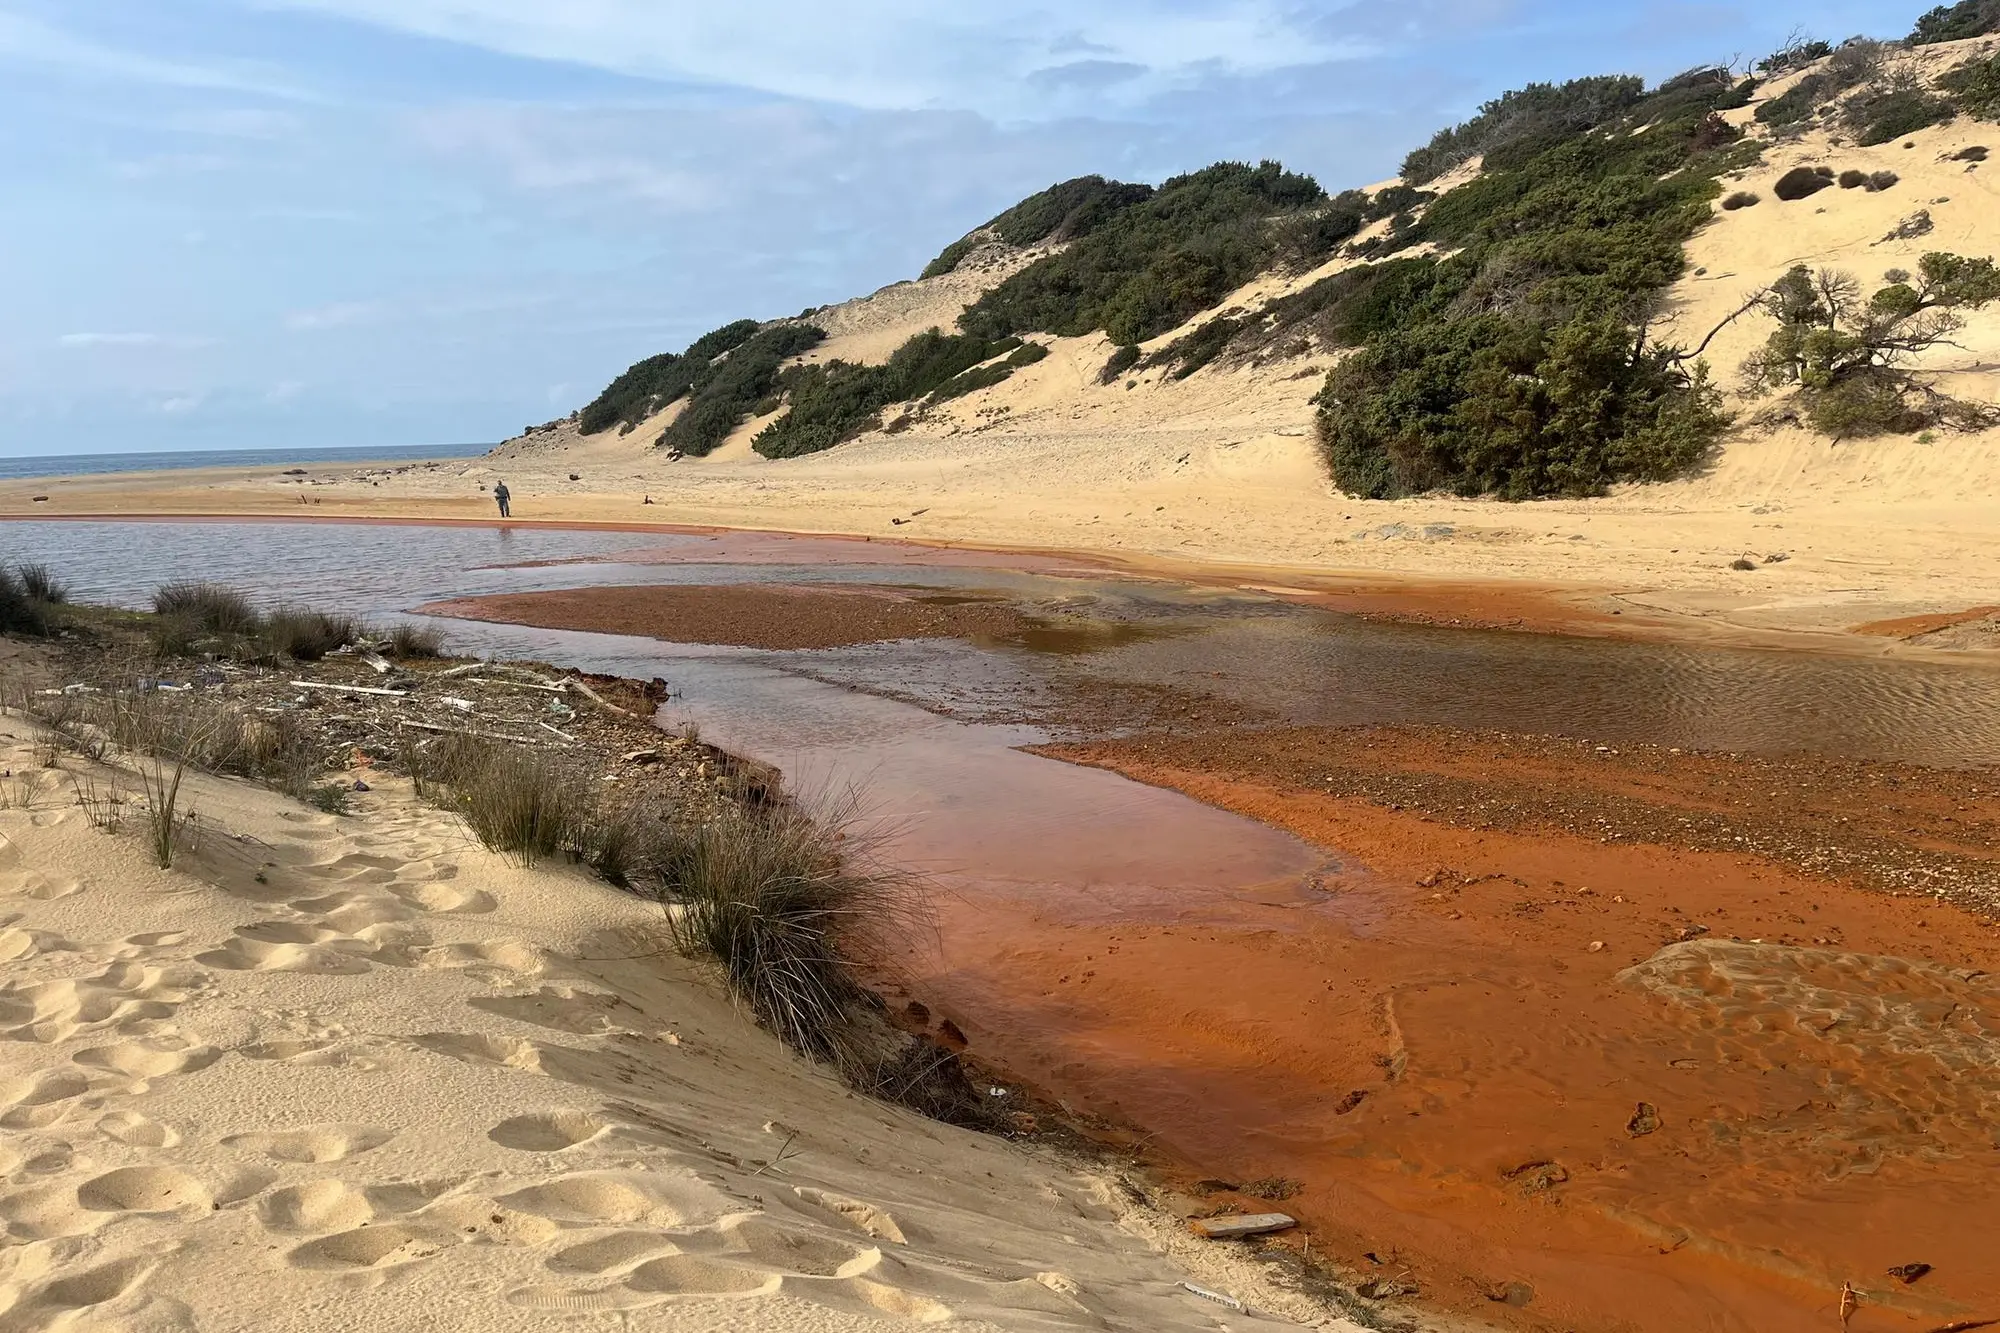 The red river spilled into the sea in Piscinas (photo L'Unione Sarda)